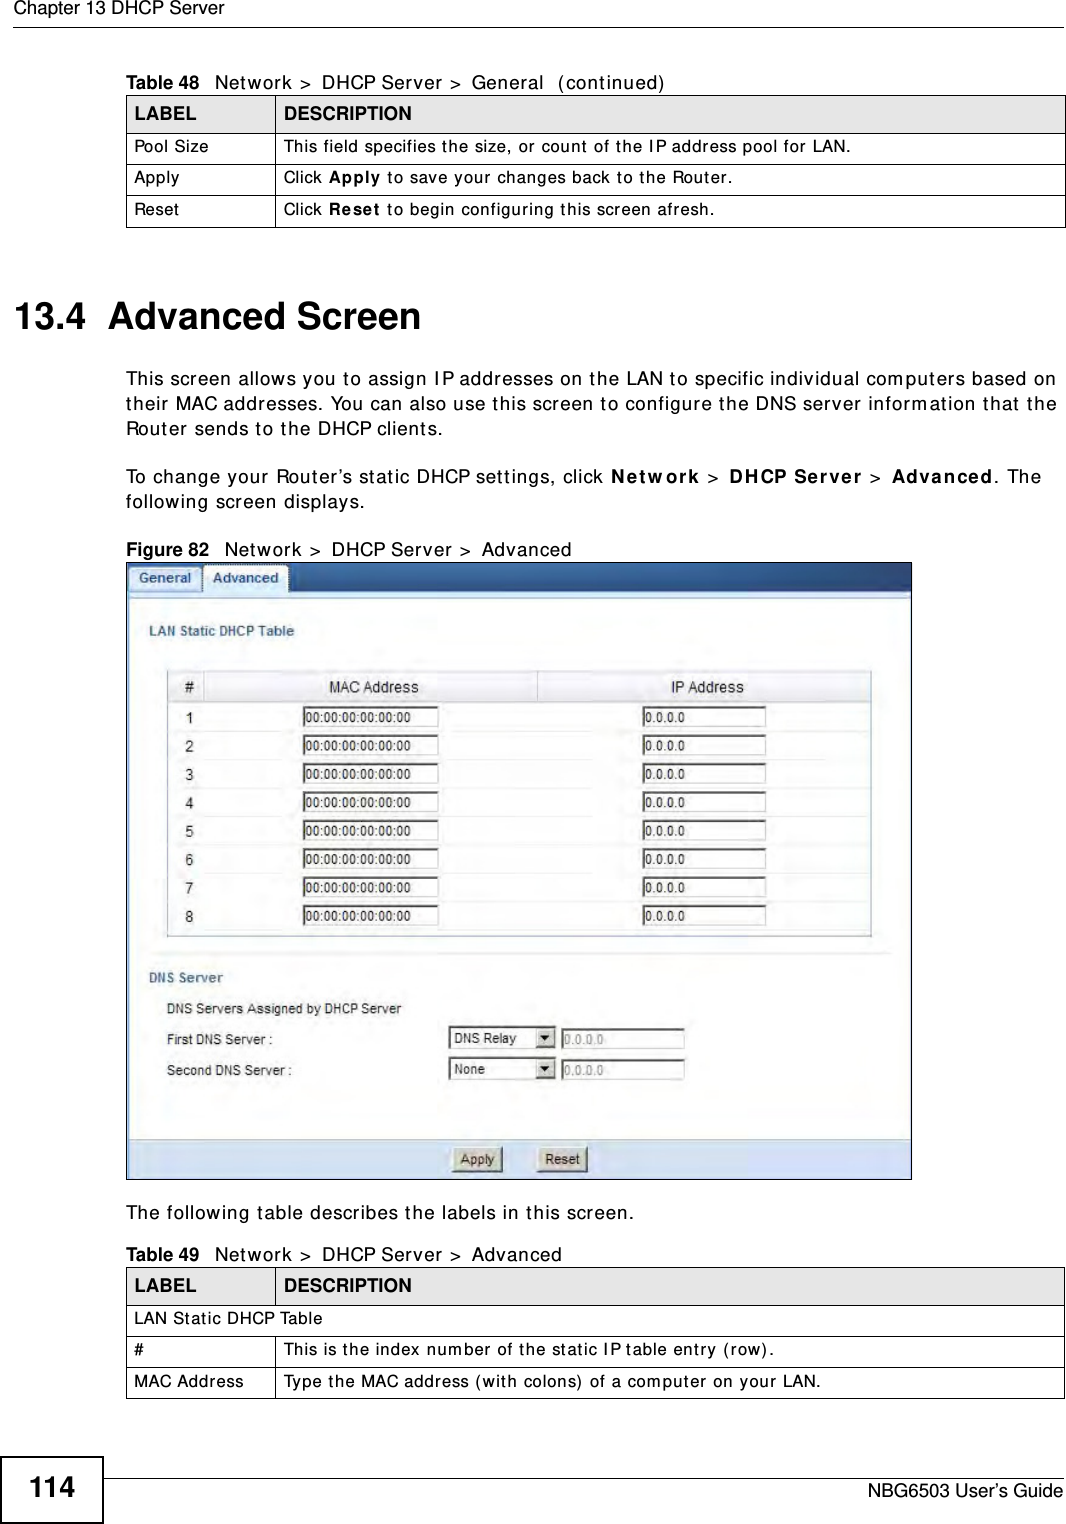 Chapter 13 DHCP ServerNBG6503 User’s Guide11413.4  Advanced Screen    This screen allows you to assign IP addresses on the LAN to specific individual computers based on their MAC addresses. You can also use this screen to configure the DNS server information that the Router sends to the DHCP clients.To change your Router’s static DHCP settings, click Network &gt; DHCP Server &gt; Advanced. The following screen displays.Figure 82   Network &gt; DHCP Server &gt; Advanced The following table describes the labels in this screen.Pool Size This field specifies the size, or count of the IP address pool for LAN.Apply Click Apply to save your changes back to the Router.Reset Click Reset to begin configuring this screen afresh.Table 48   Network &gt; DHCP Server &gt; General  (continued)LABEL DESCRIPTIONTable 49   Network &gt; DHCP Server &gt; AdvancedLABEL DESCRIPTIONLAN Static DHCP Table# This is the index number of the static IP table entry (row).MAC Address Type the MAC address (with colons) of a computer on your LAN.